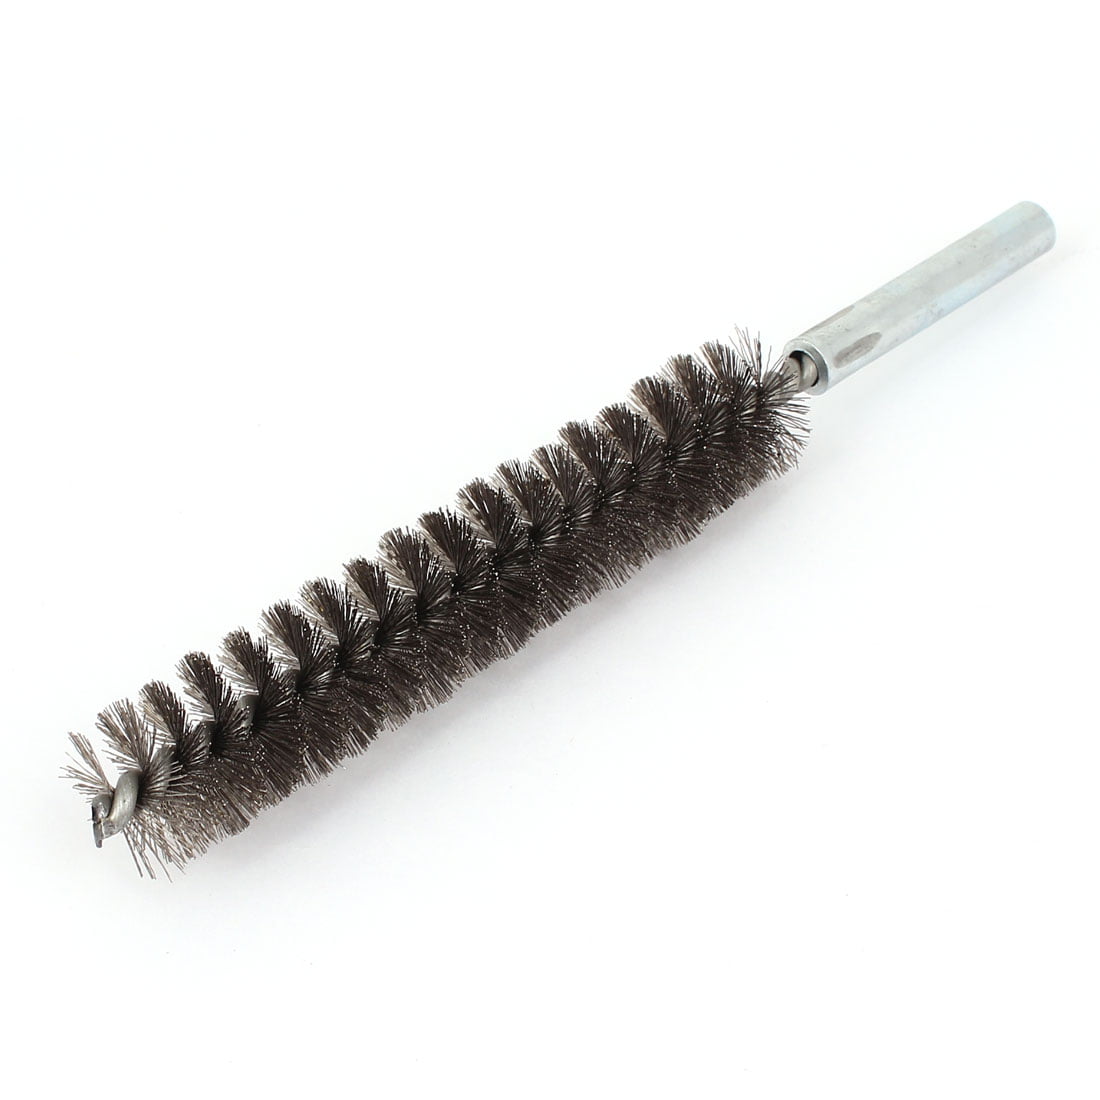 Drain Pipe Cleaning Brush (2 pieces) – Variety Intellect